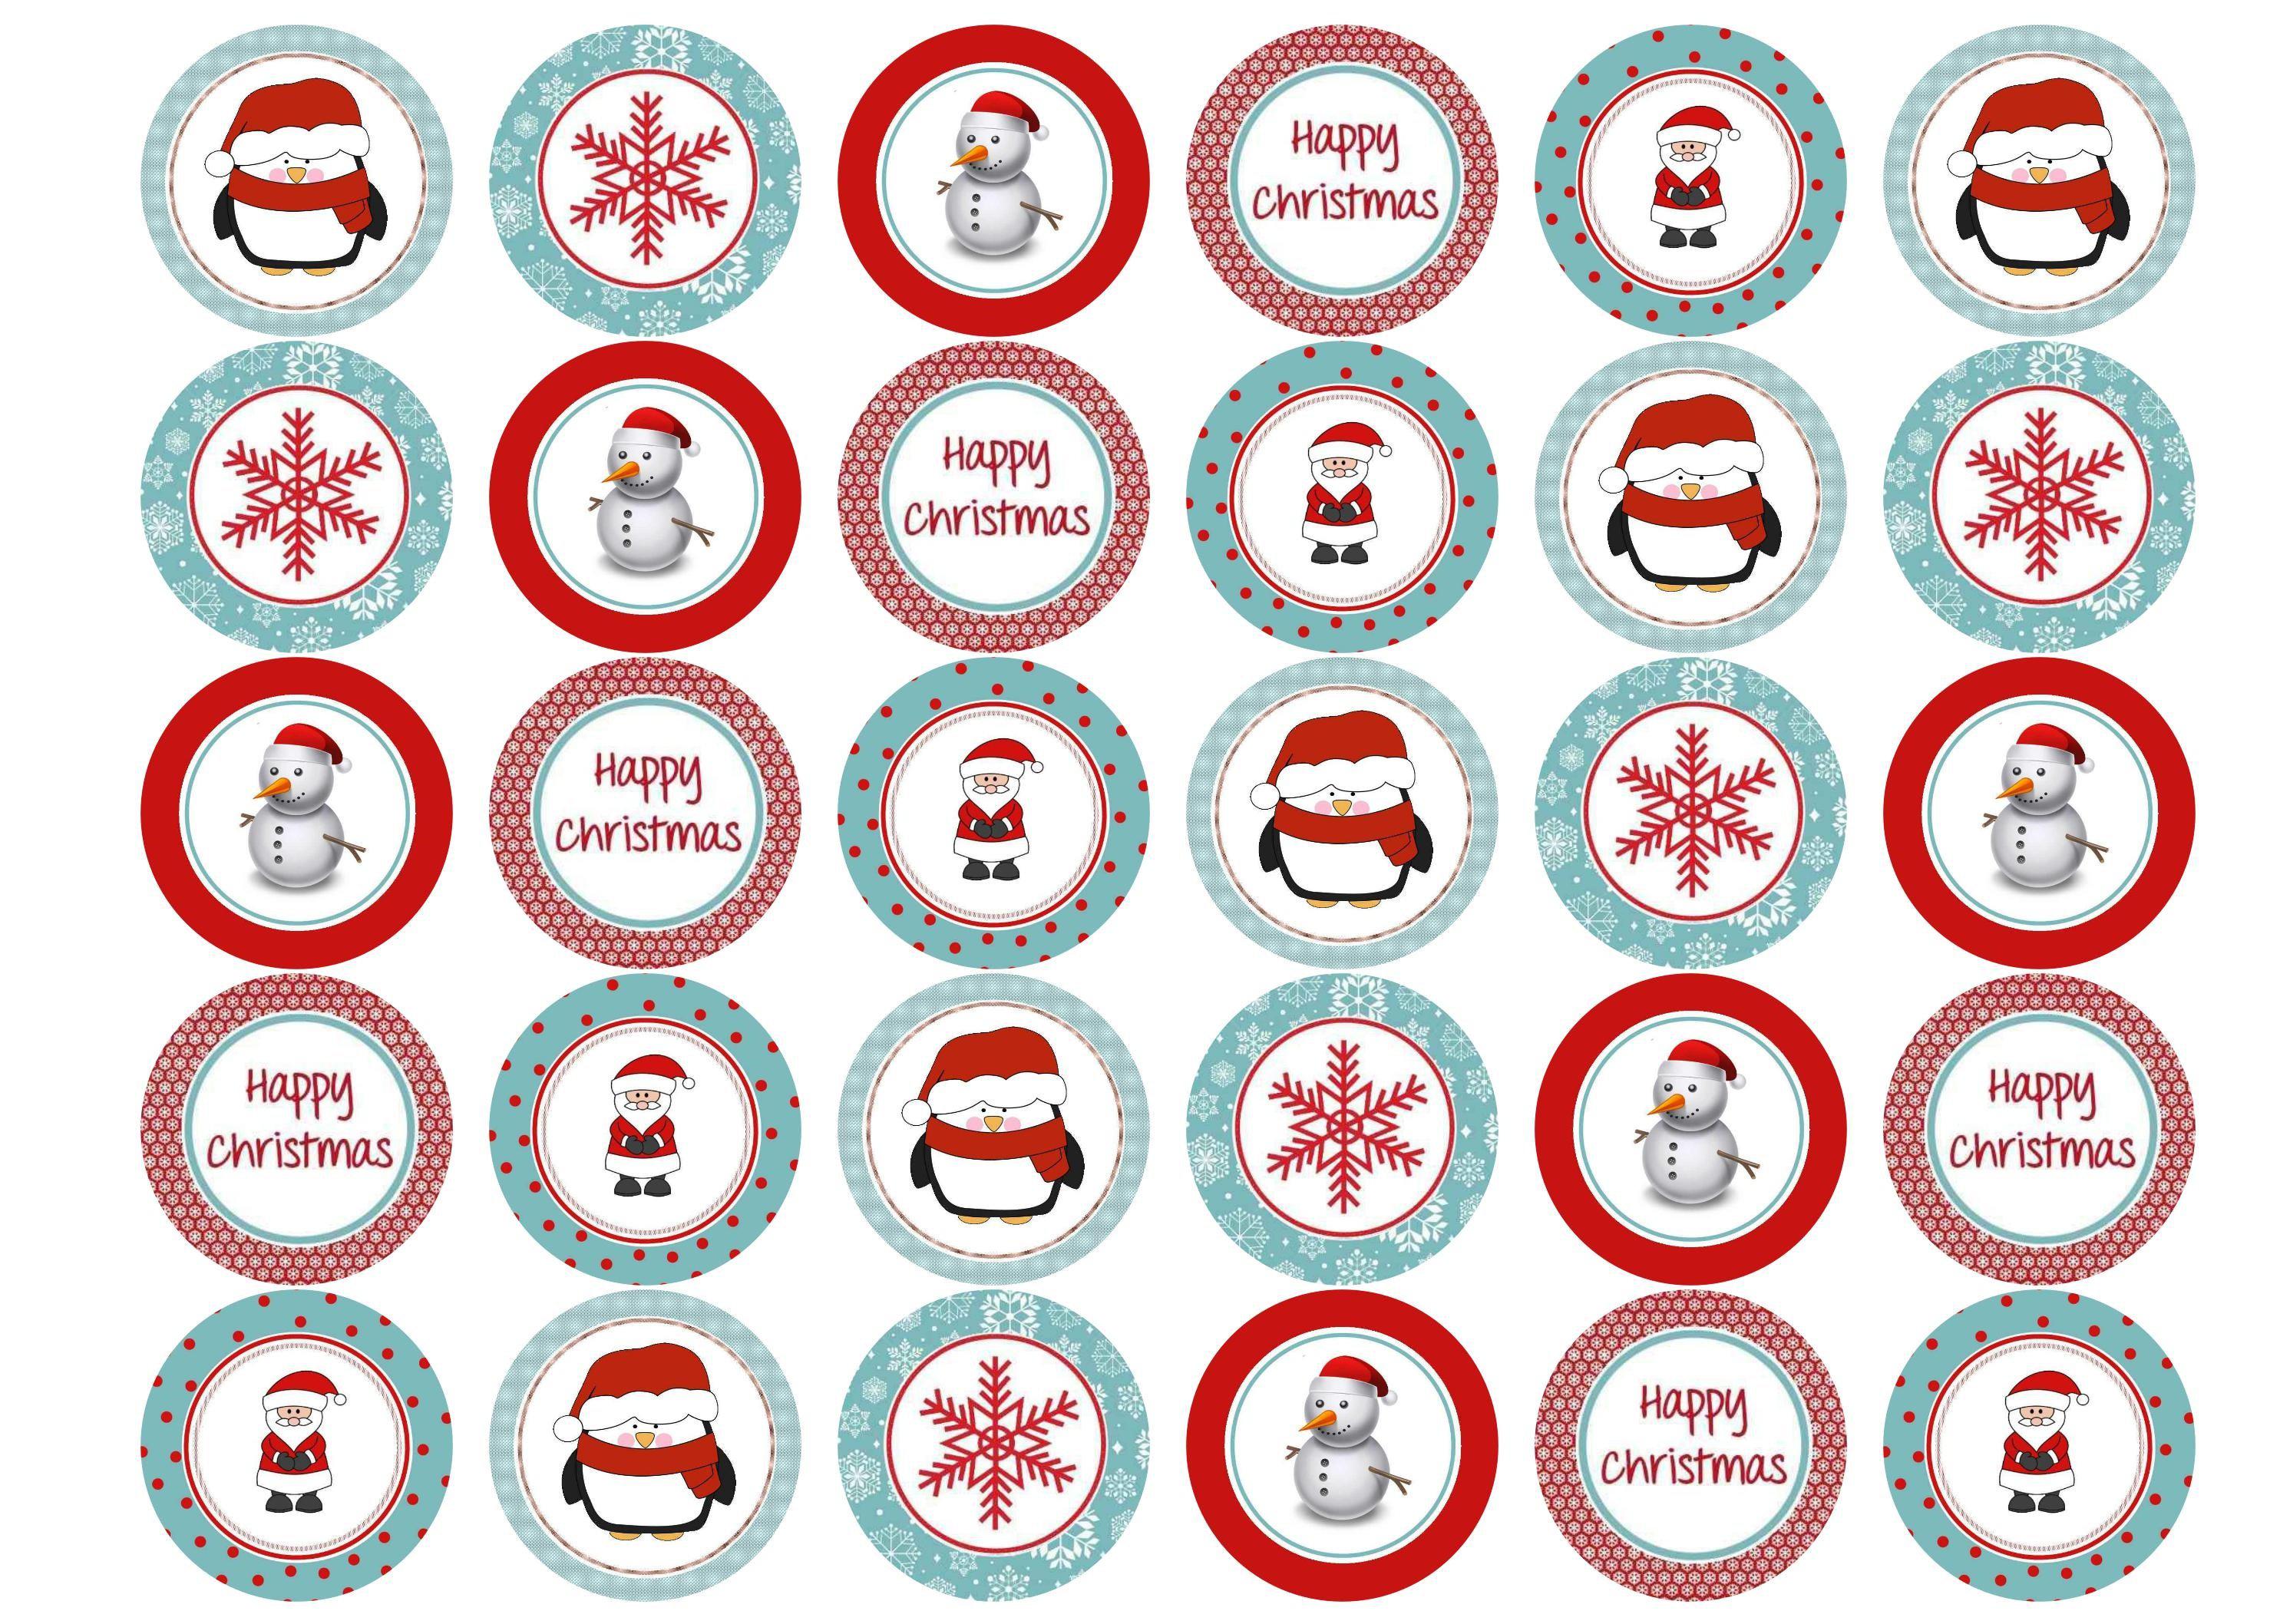 Printed Christmas cupcake toppers and cupcake toppers printed onto rice paper or icing